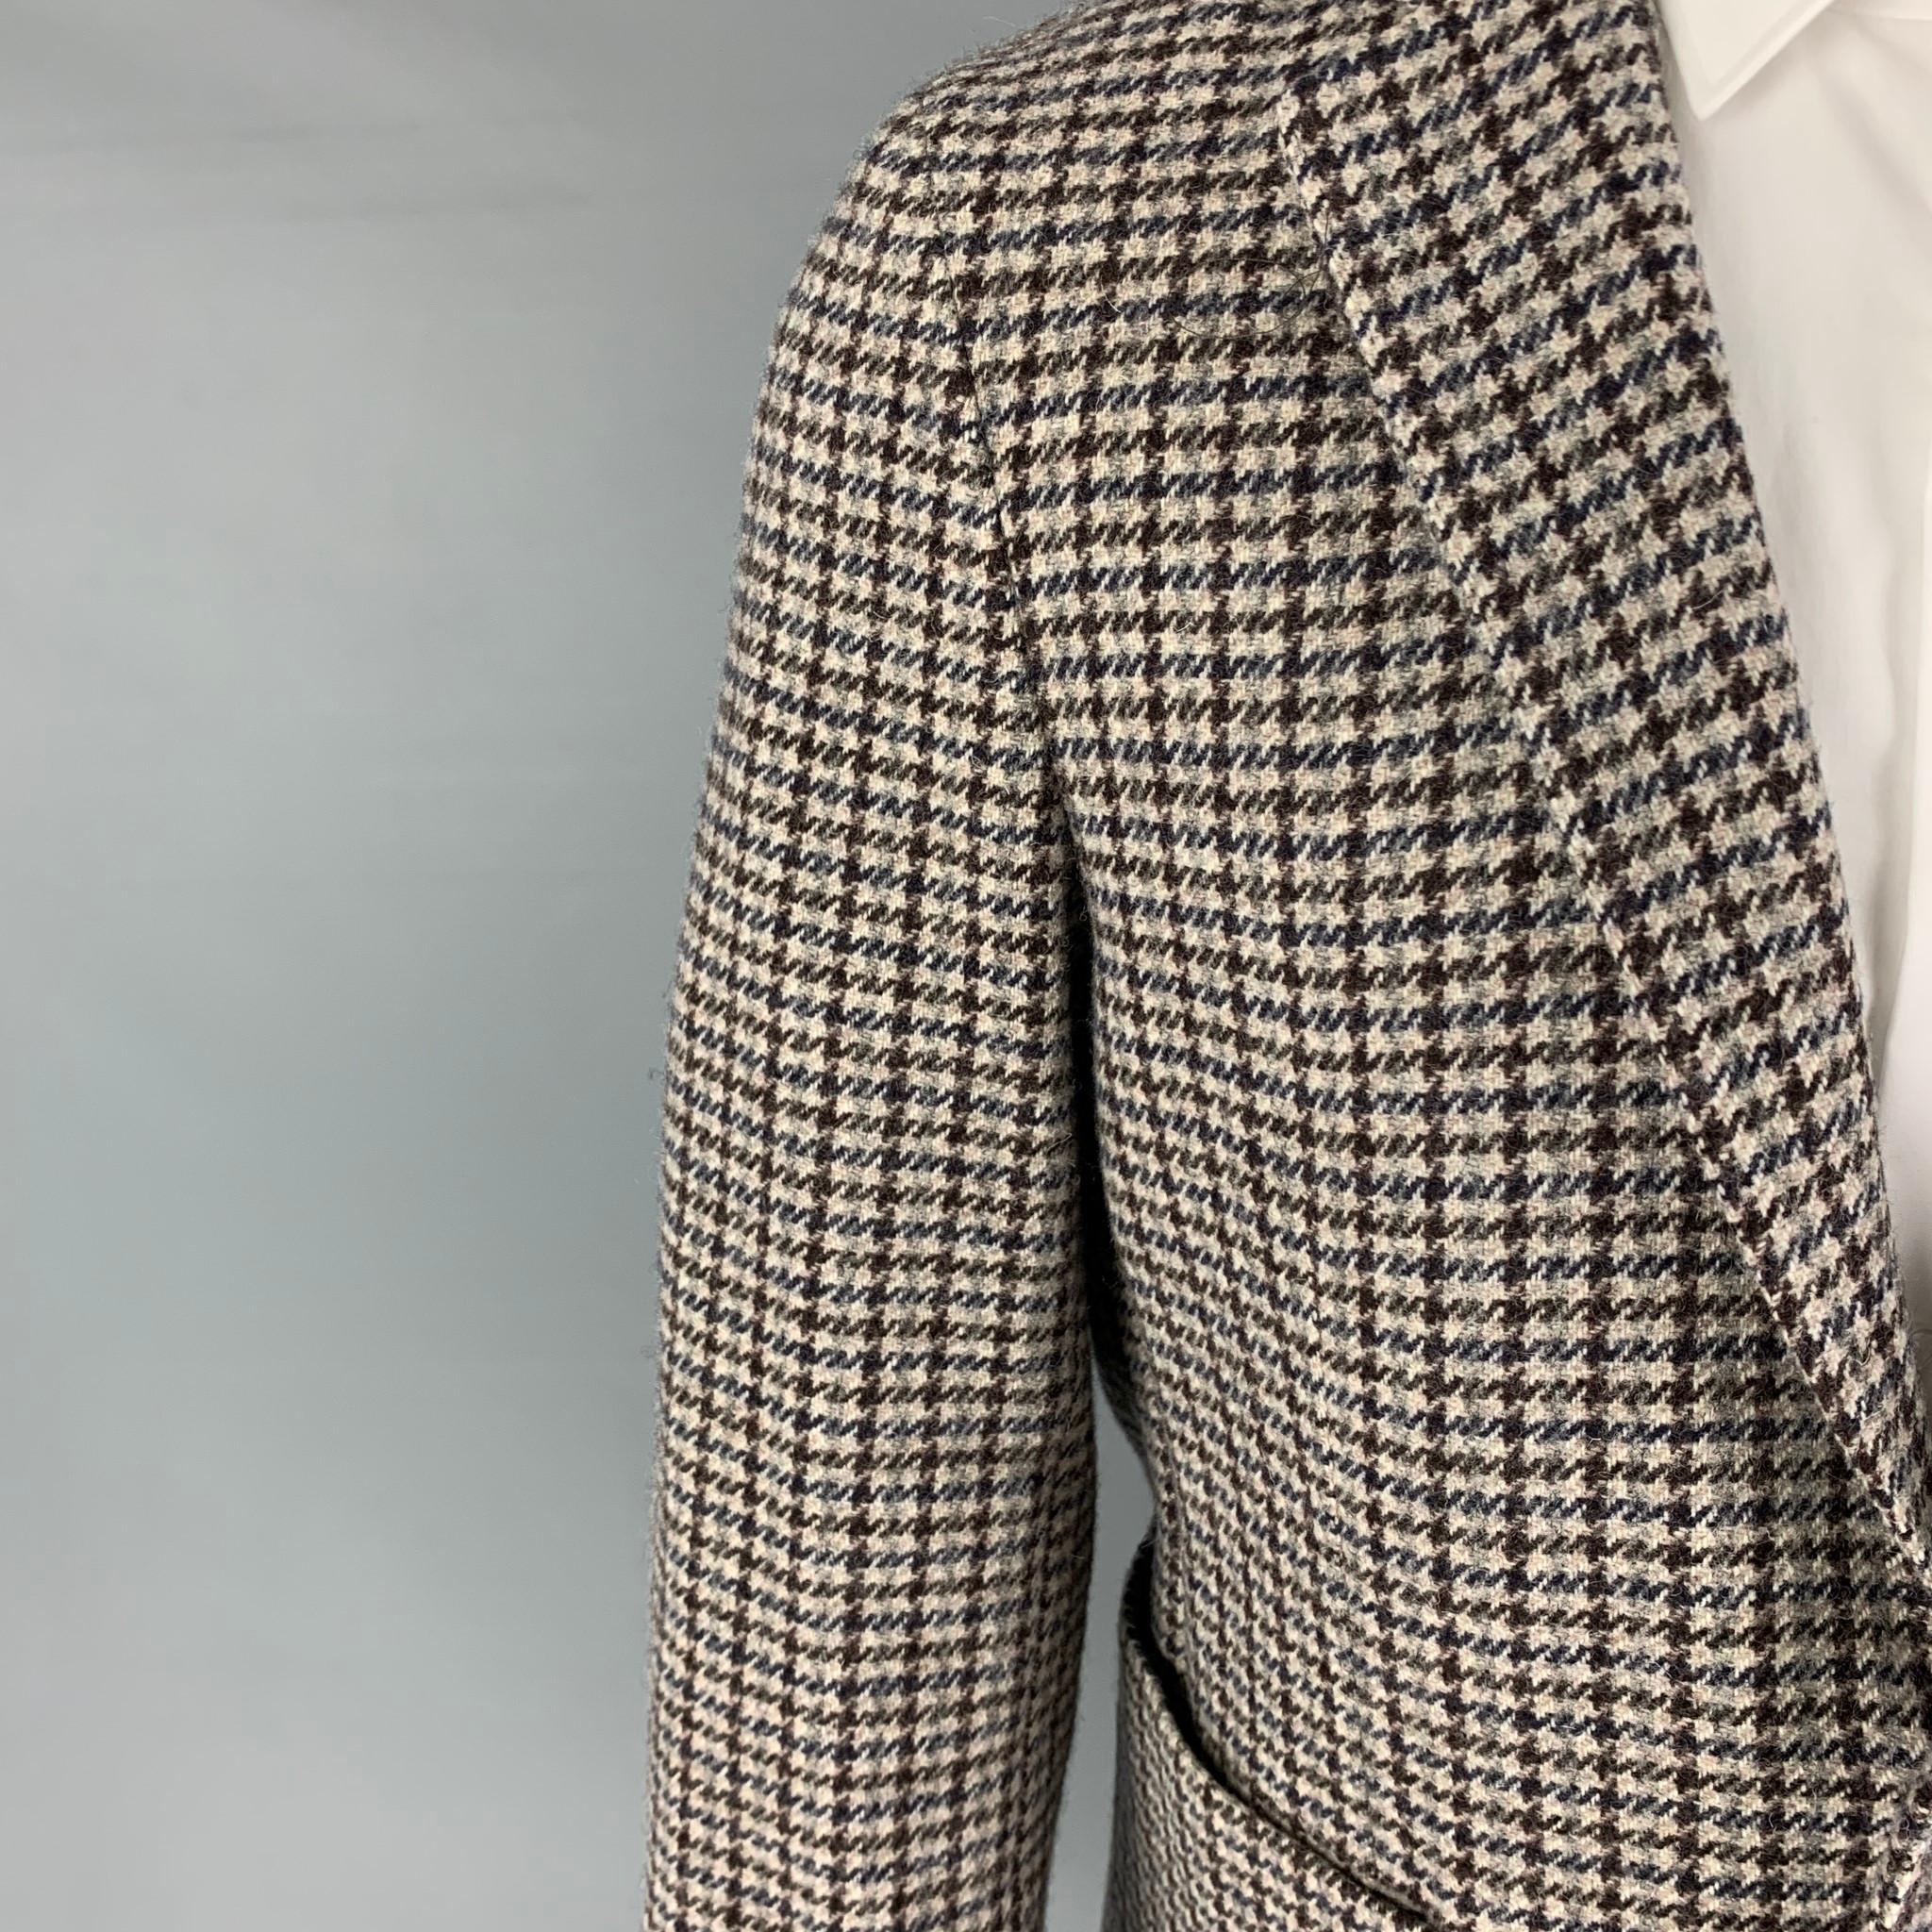 OFFICINE GENERALE sport coat comes in a grey & brown plaid wool featuring a notch lapel, patch pockets, single back vent, and a double button closure. 

Excellent Pre-Owned Condition.
Marked: 48

Measurements:

Shoulder: 17 in.
Chest: 38 in.
Sleeve: